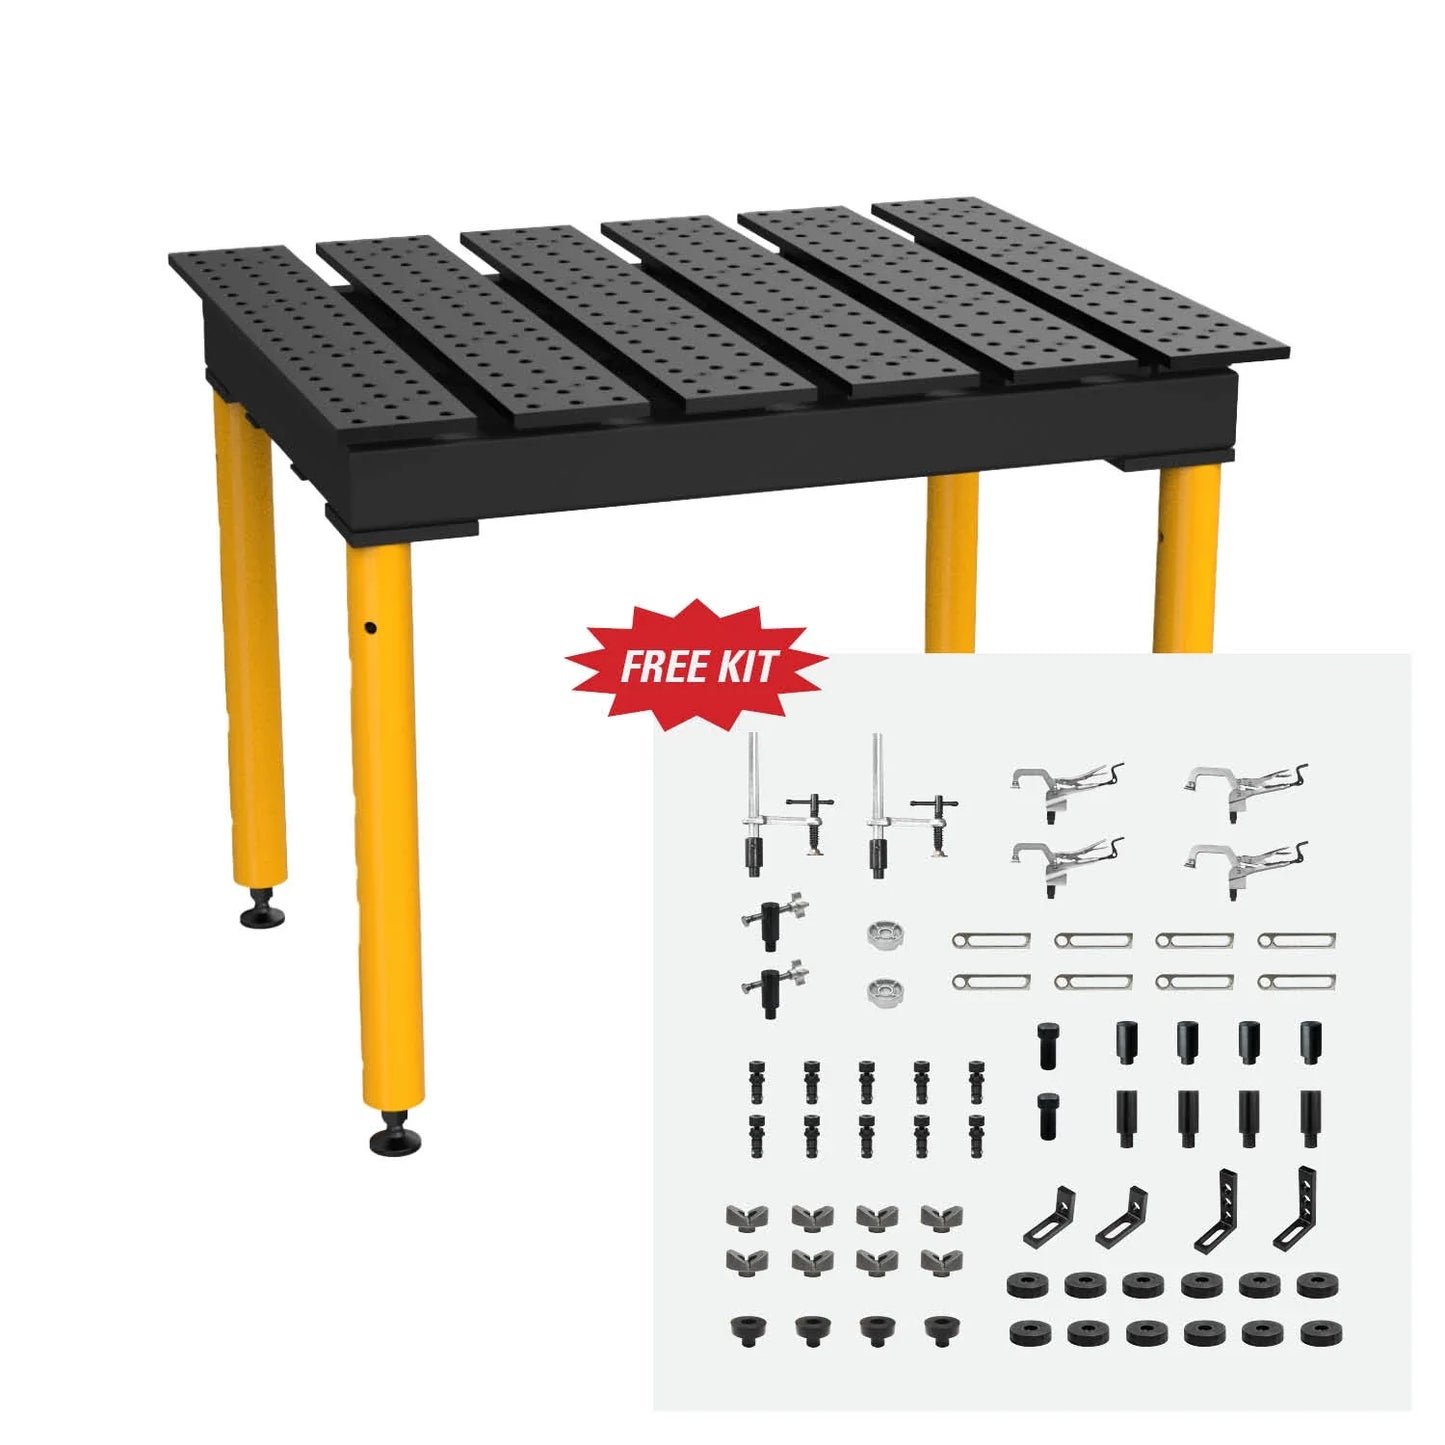 MAX Slotted 4' x 3' Nitrided Table with FREE 66-pc Fixturing Kit